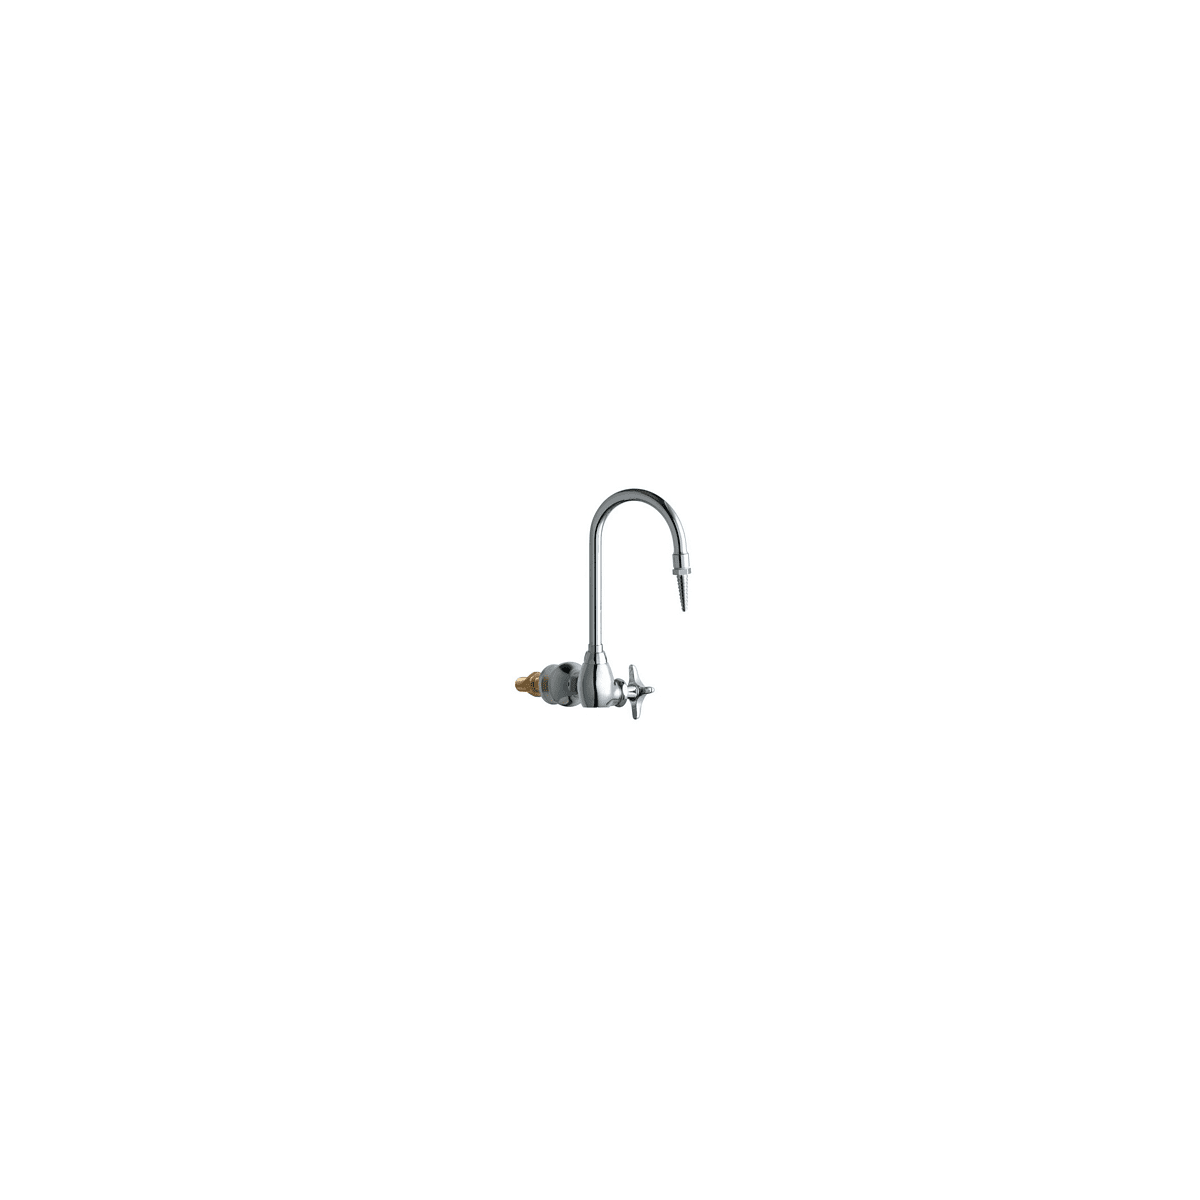 Chicago Faucets 933 Wscp Chrome Wall Mounted Laboratory Faucet